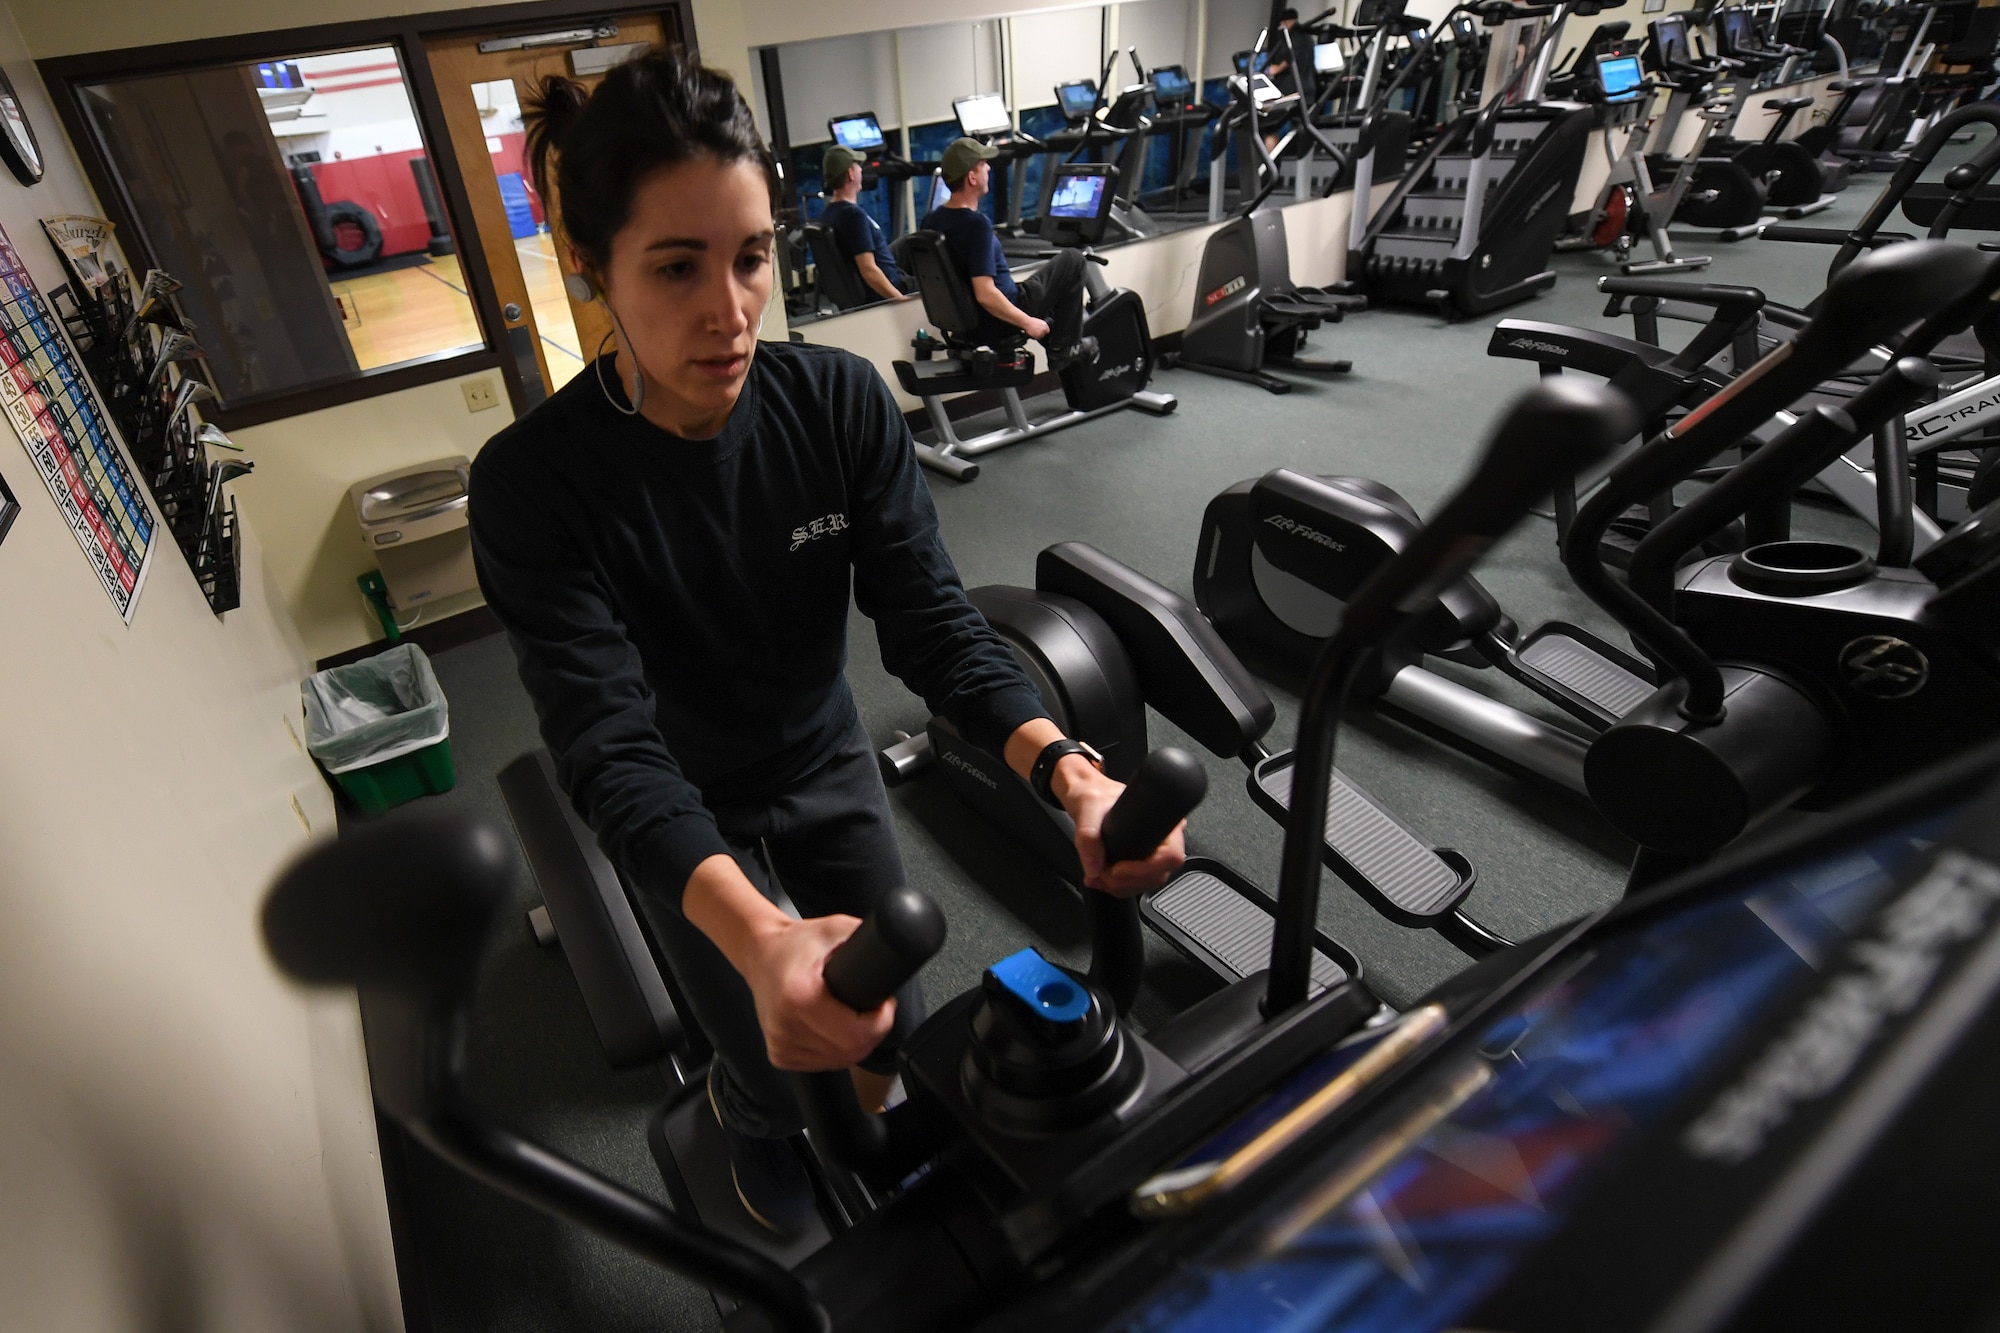 Angela Montgomery, secretary for the 911th Mission Support Group, and Robert Ree, director of the 911th Airman Family Readiness Center, exercise using fitness center equipment at Pittsburgh IAP ARS, Pennsylvania, December 11, 2018. The 911th Airlift Wing Fitness Center recently replaced older cardio equipment with brand new equipment at the end of November, including seven elliptical trainers, six new treadmills, four stationary bicycles and a brand new Arc Trainer. (U.S. Air Force photo by Joshua J. Seybert)